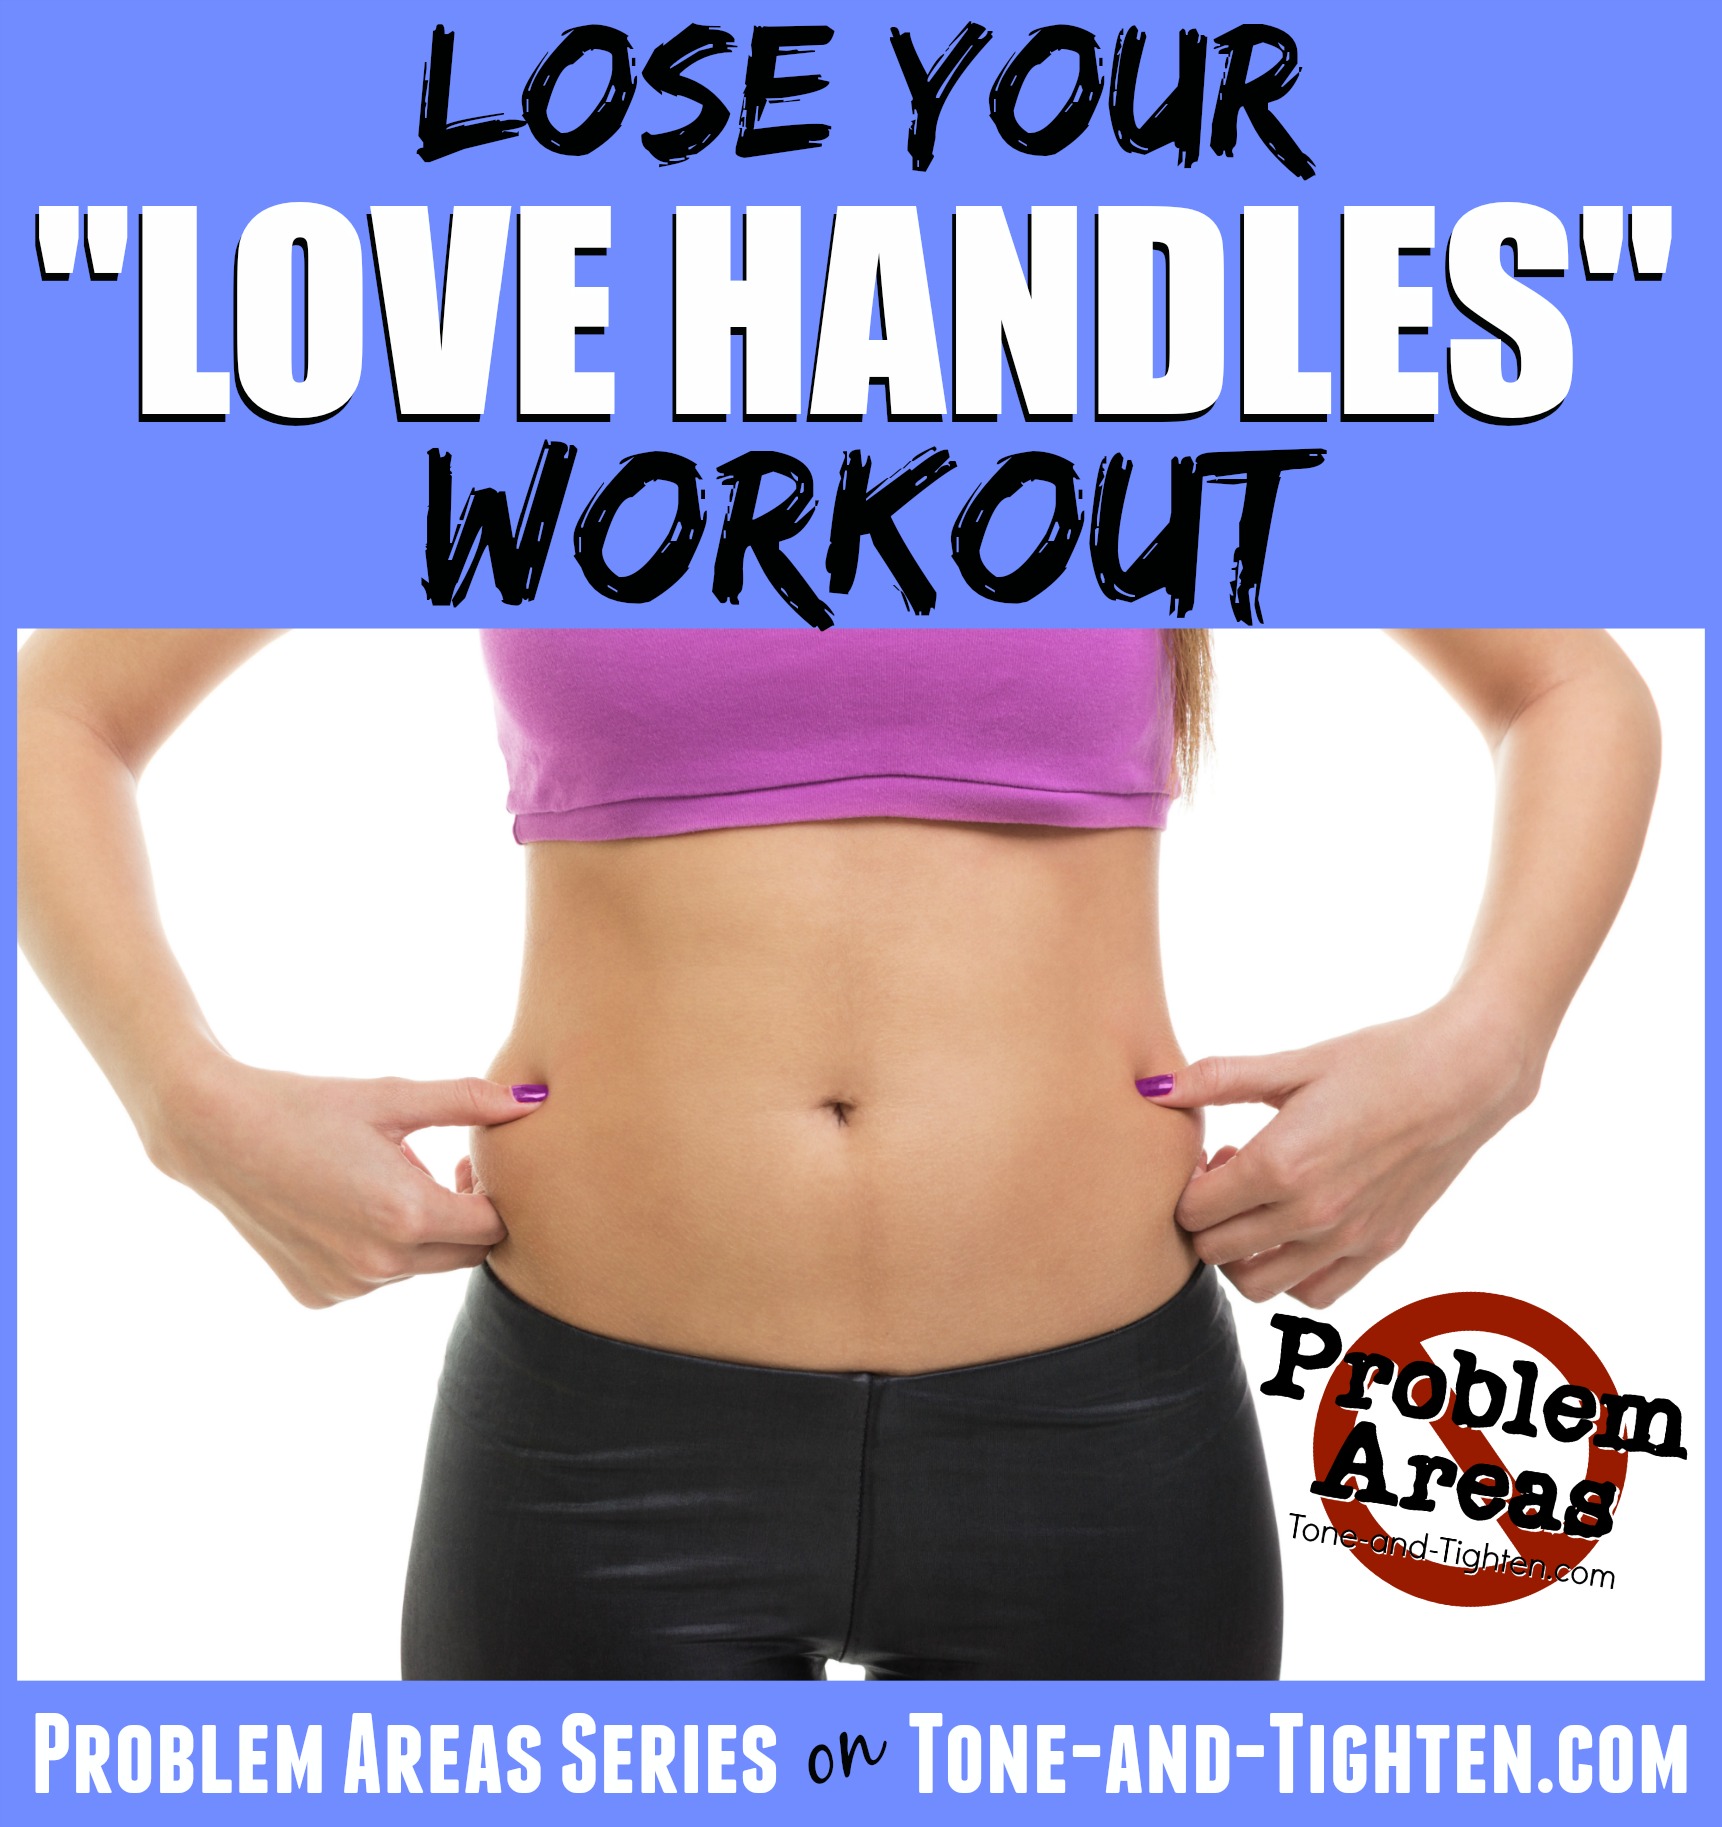 How to get rid of love handles – Best exercises to lose love handles!